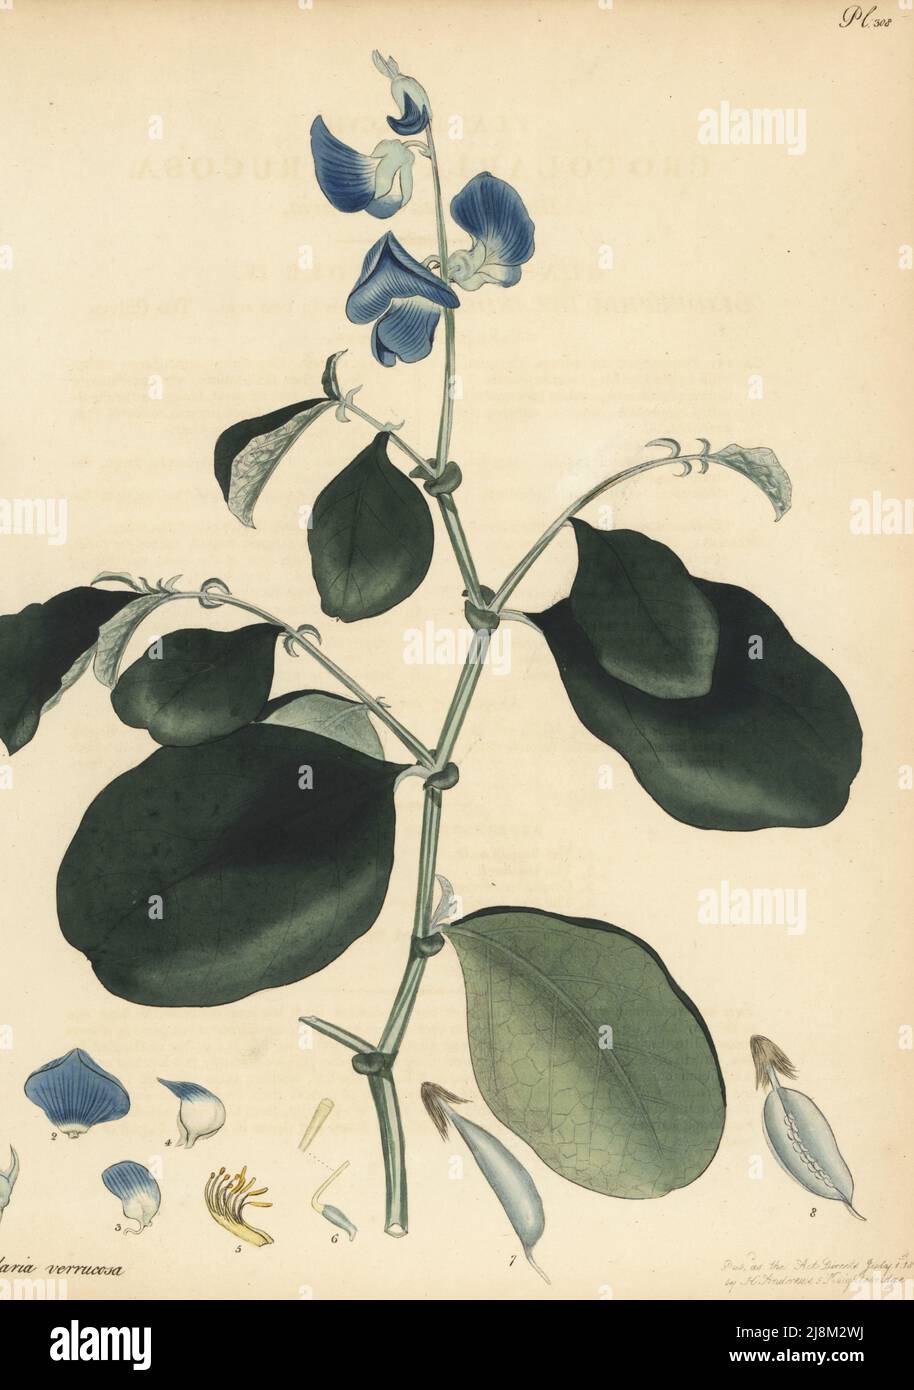 Blue rattlepod, Crotalaria verrucosa. Blue-flowered crotolaria, Crotolaria verrucosa. From the East Indies, China, India, Southeast Asia, in the garden of W.H. Irby at the Parsonage, Farnham Royal. Copperplate engraving drawn, engraved and hand-coloured by Henry Andrews from his Botanical Register, Volume 5, self-published in Knightsbridge, London, 1803. Stock Photo